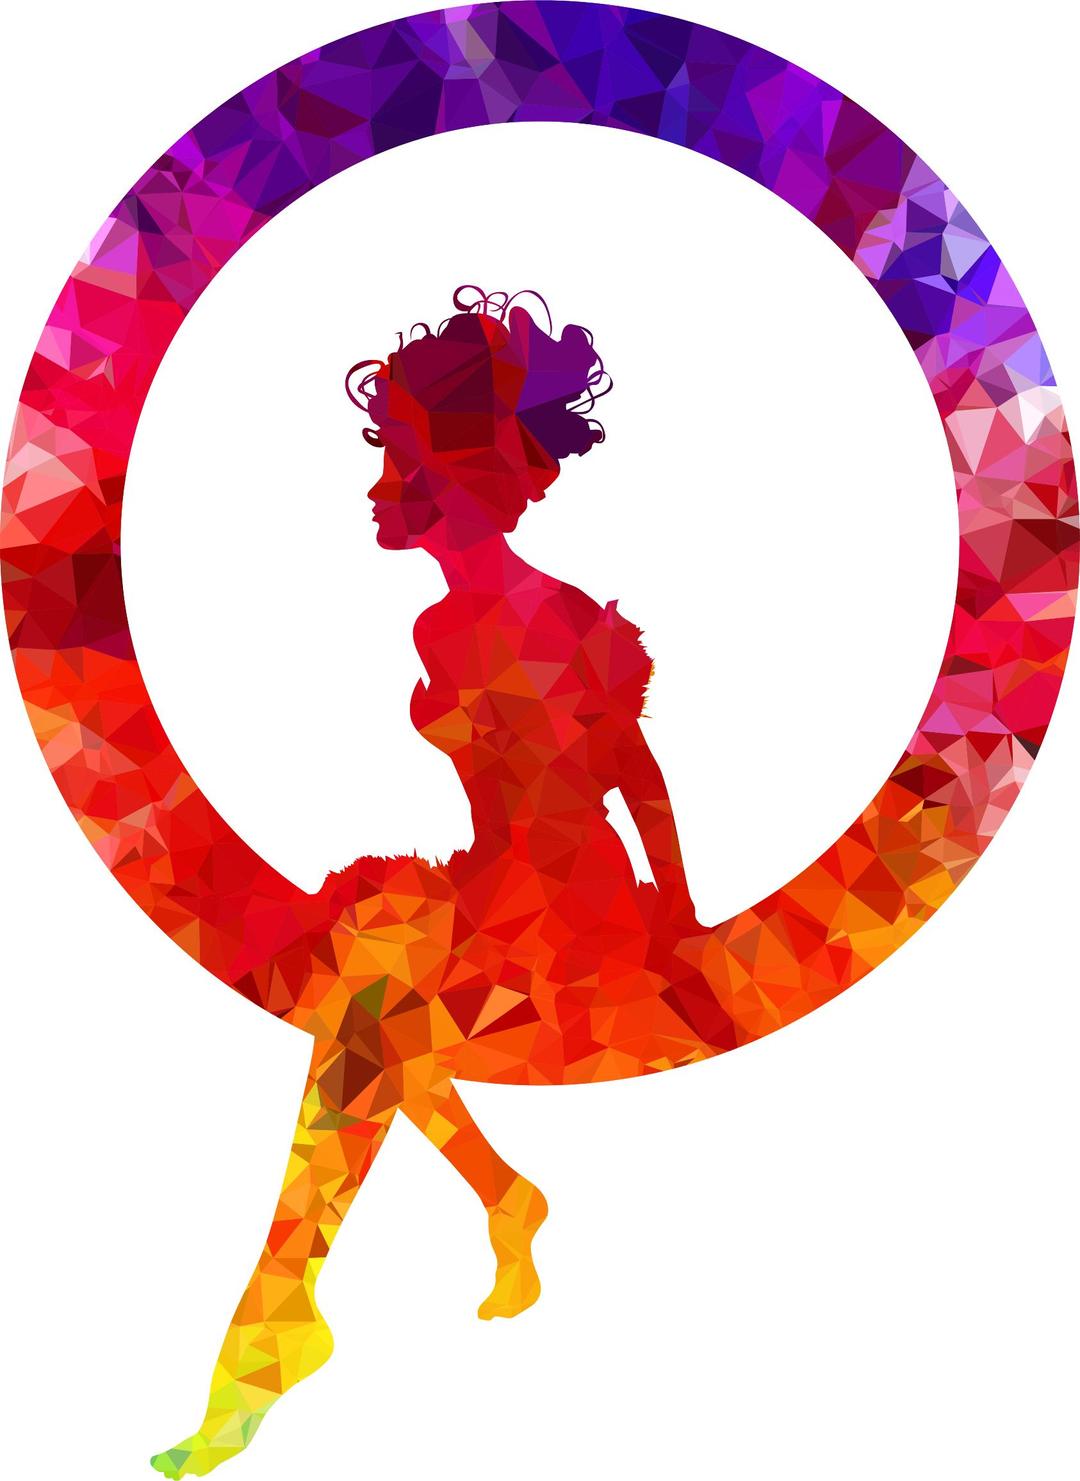 Topaz Sapphire Ruby Fairy Sitting In A Circle Silhouette png transparent